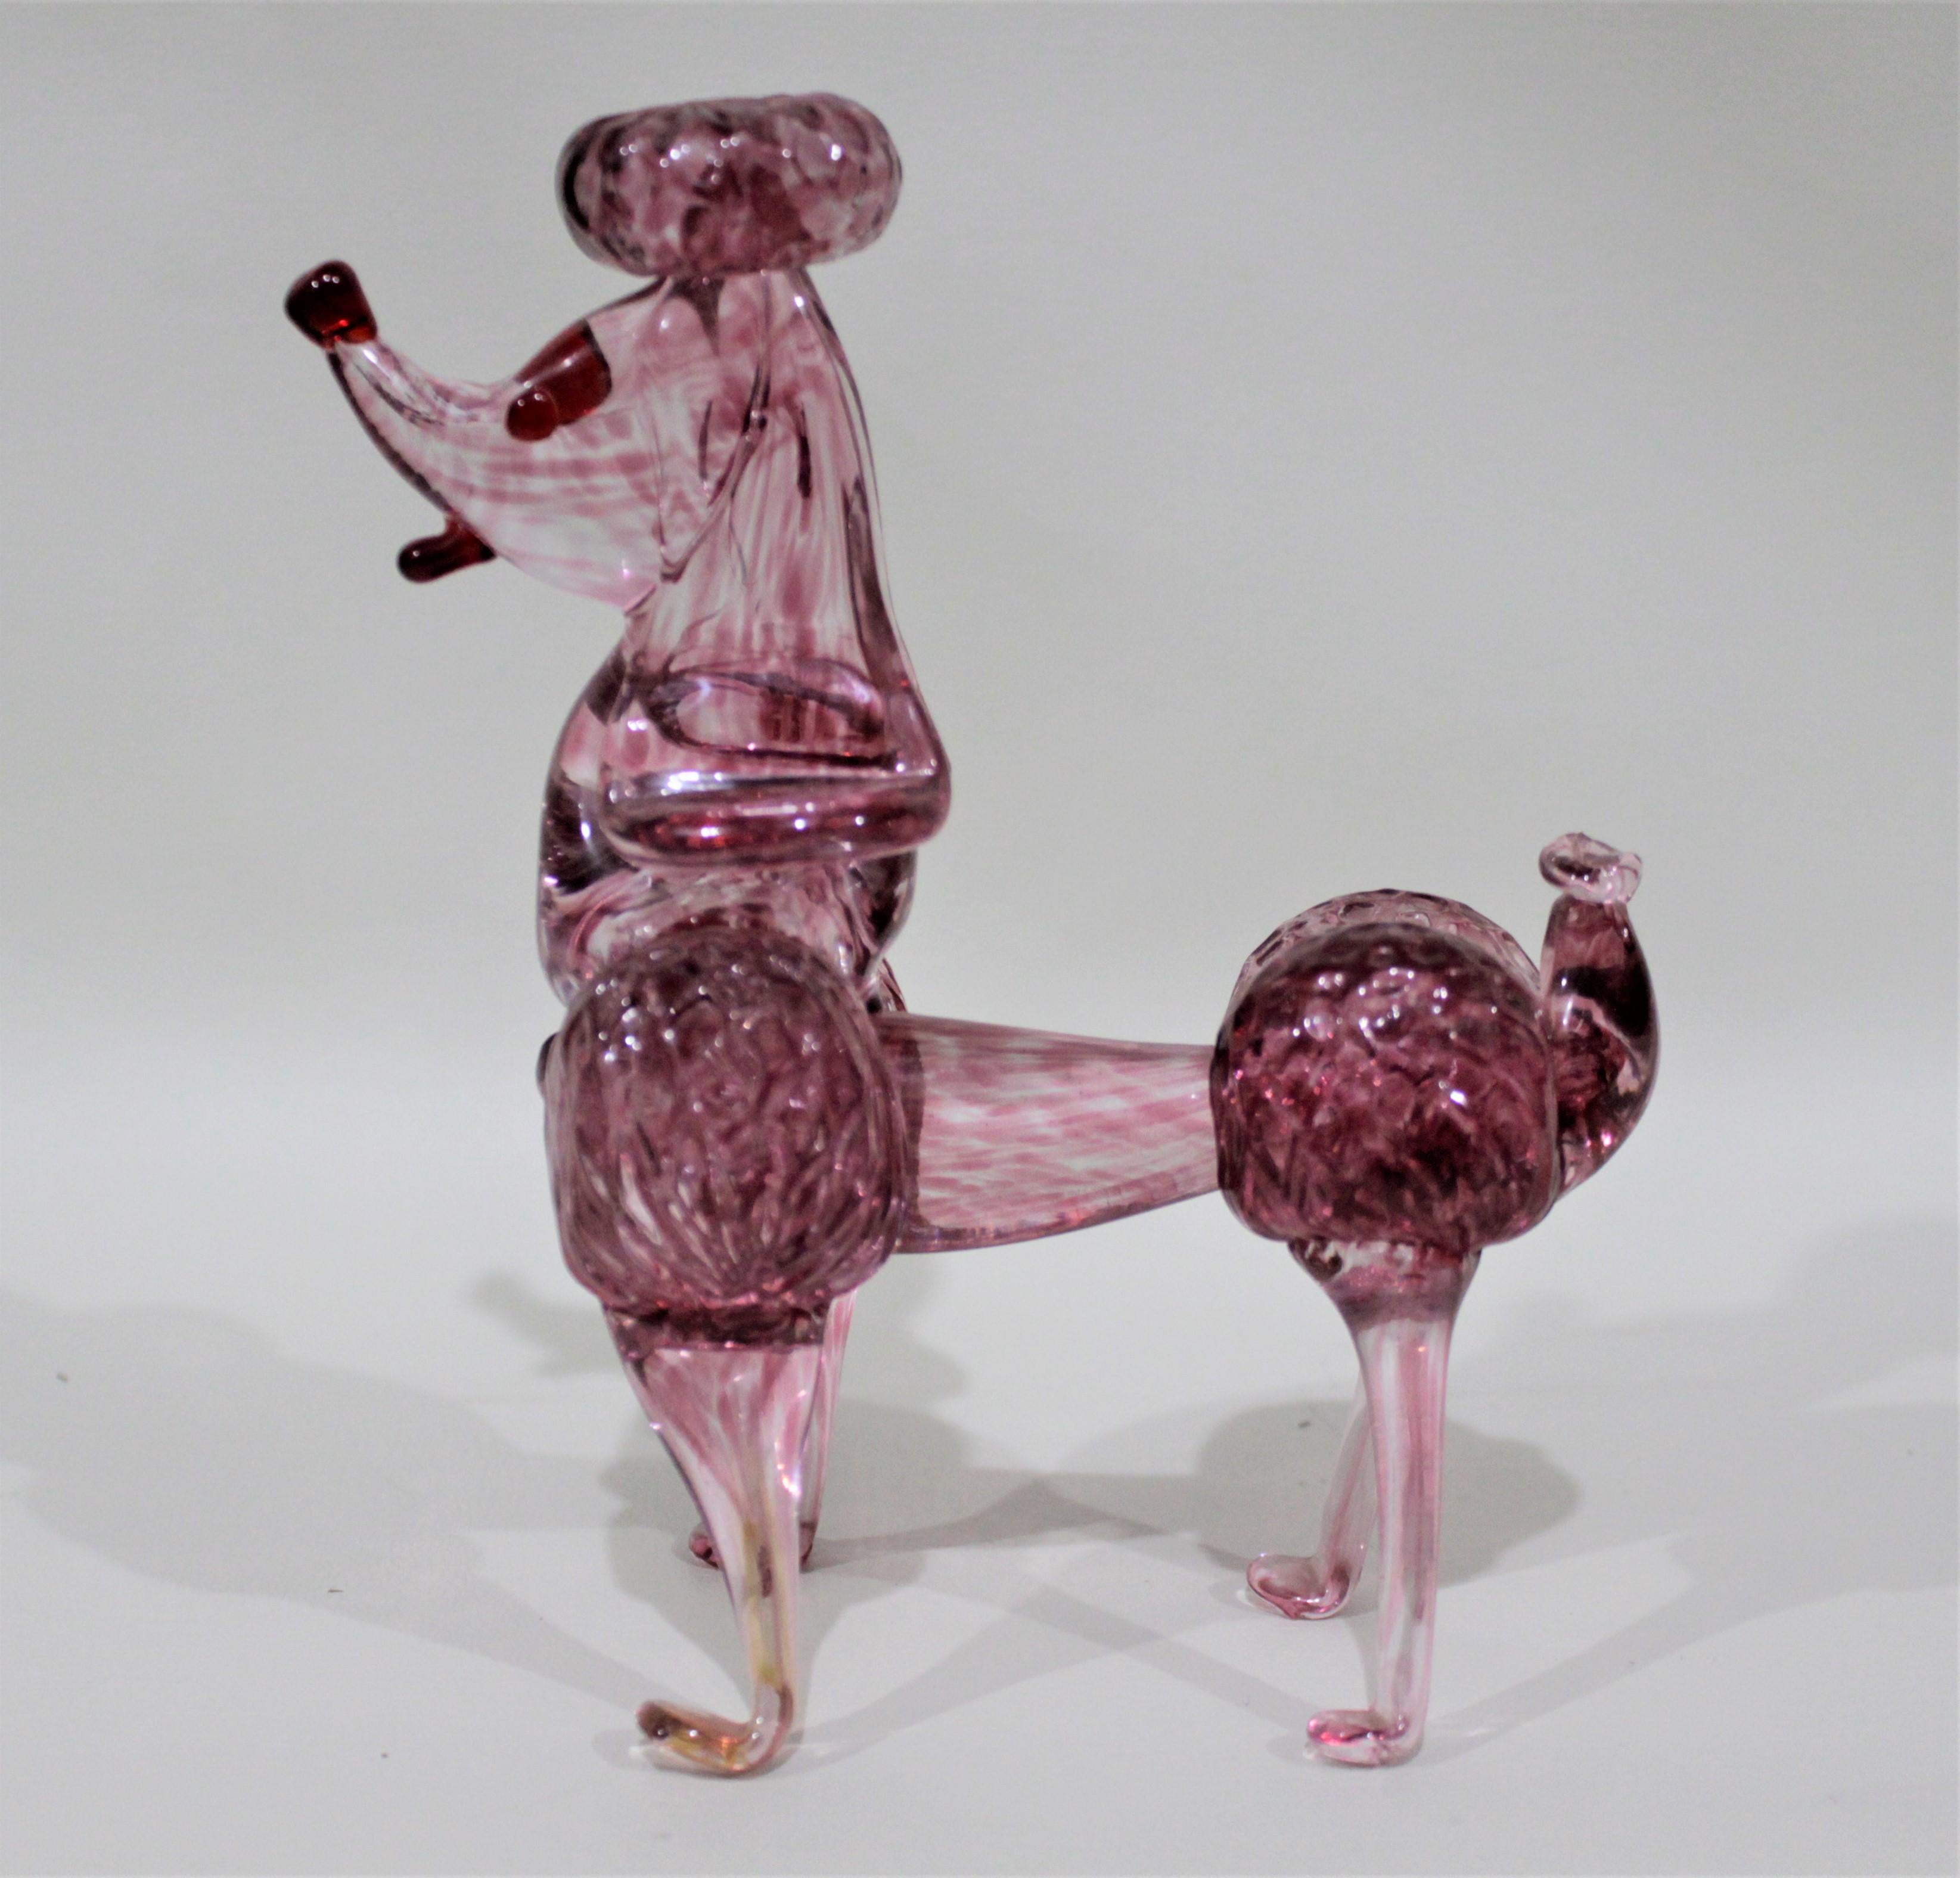 Unknown Mid-Century Modern Cranberry or Pink Art Glass Poodle Dog Figurine